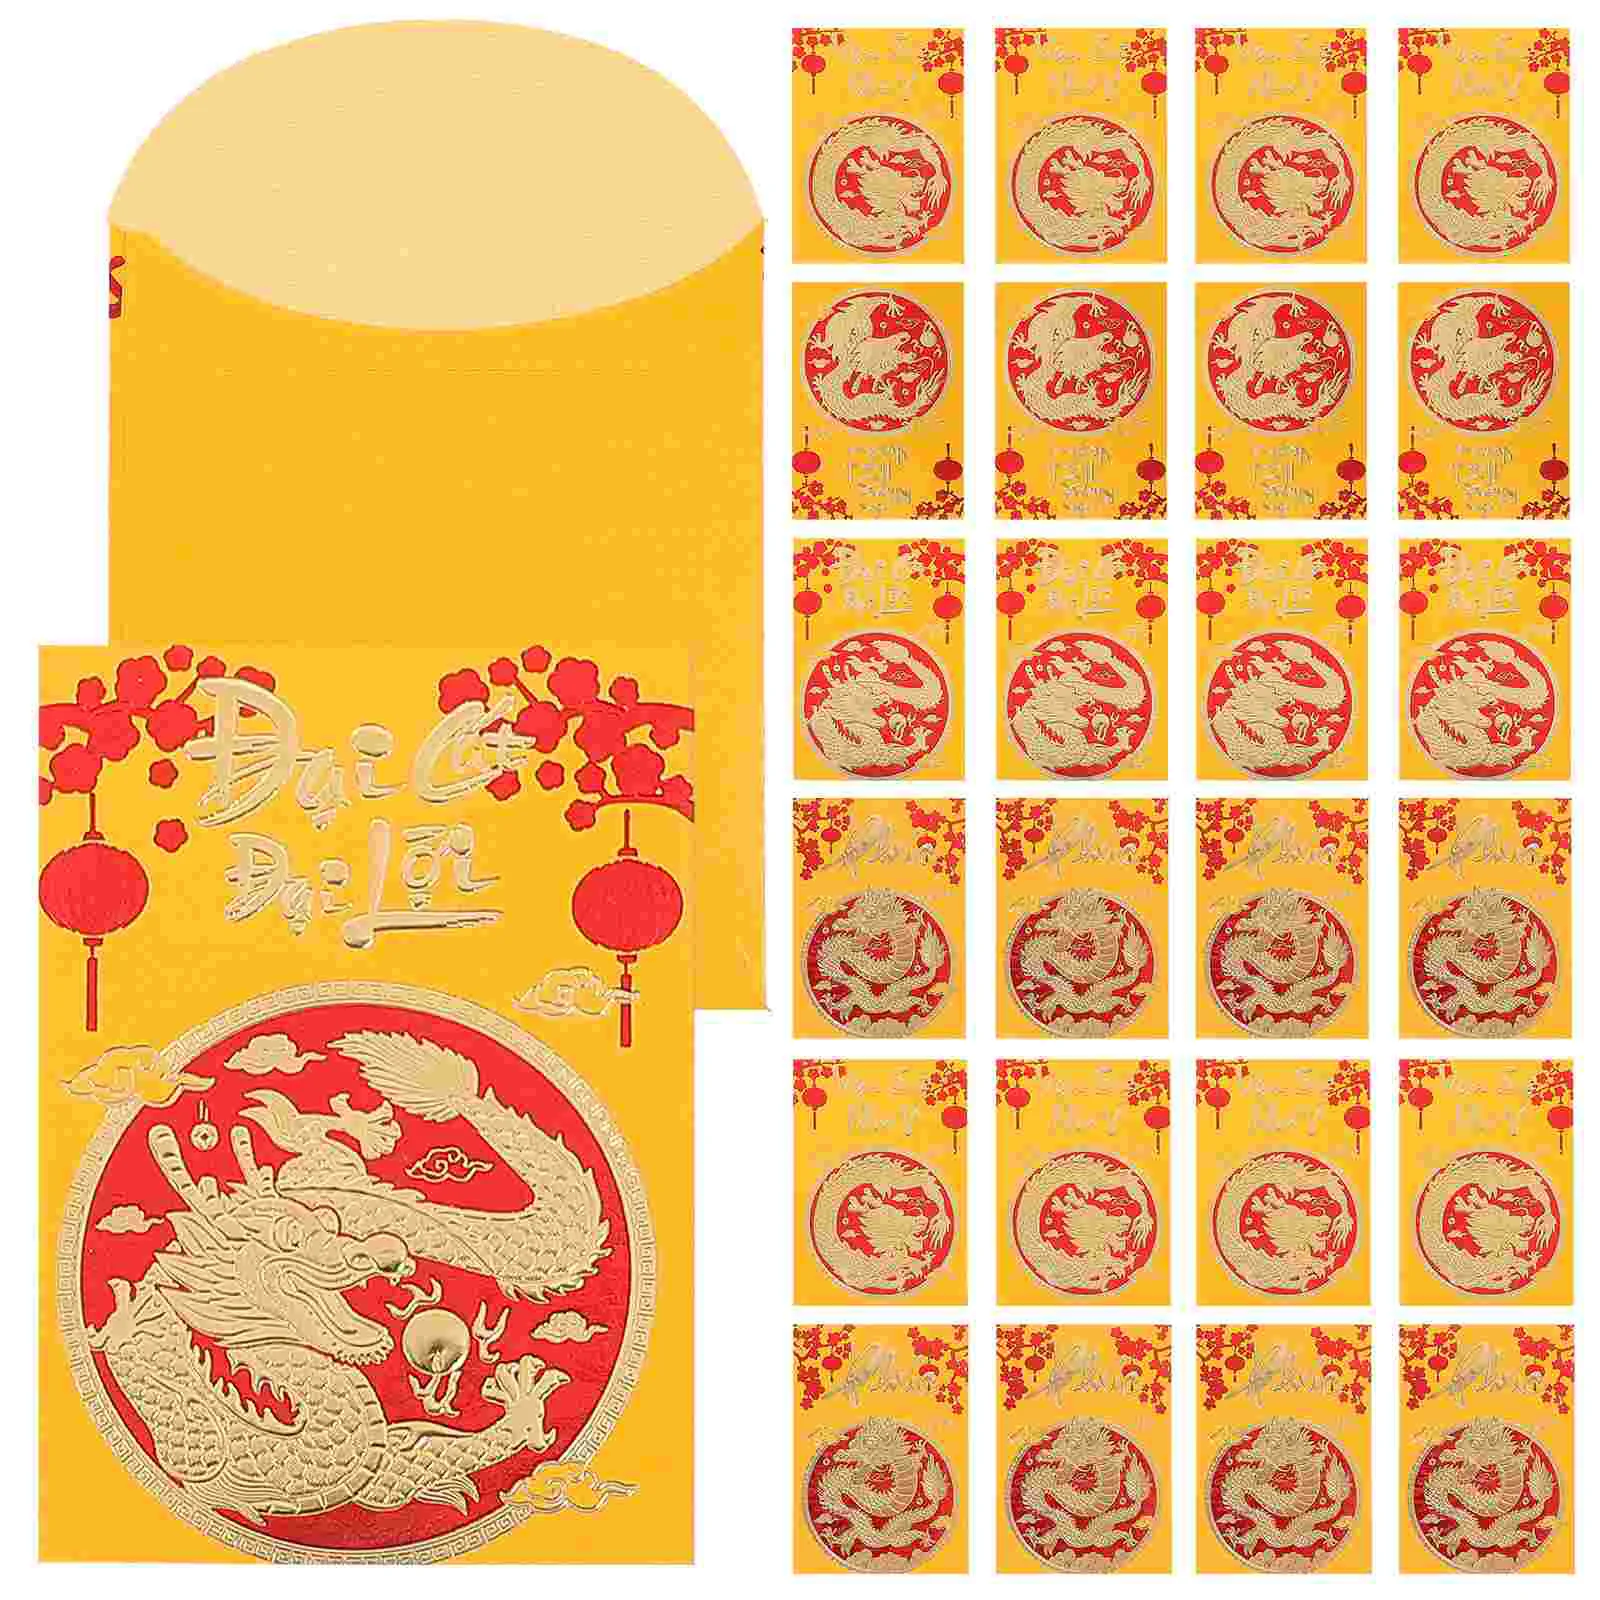 30 Pcs Money Bag Dragon Pattern Envelope New Year Red Packets Chinese Style Envelops Cute Envelopes 2024 Luck Spring Festival 60 pcs 2024 year of the dragon cartoon red envelope spring festival new year’s purse packet bag zx316 60pcs wallet